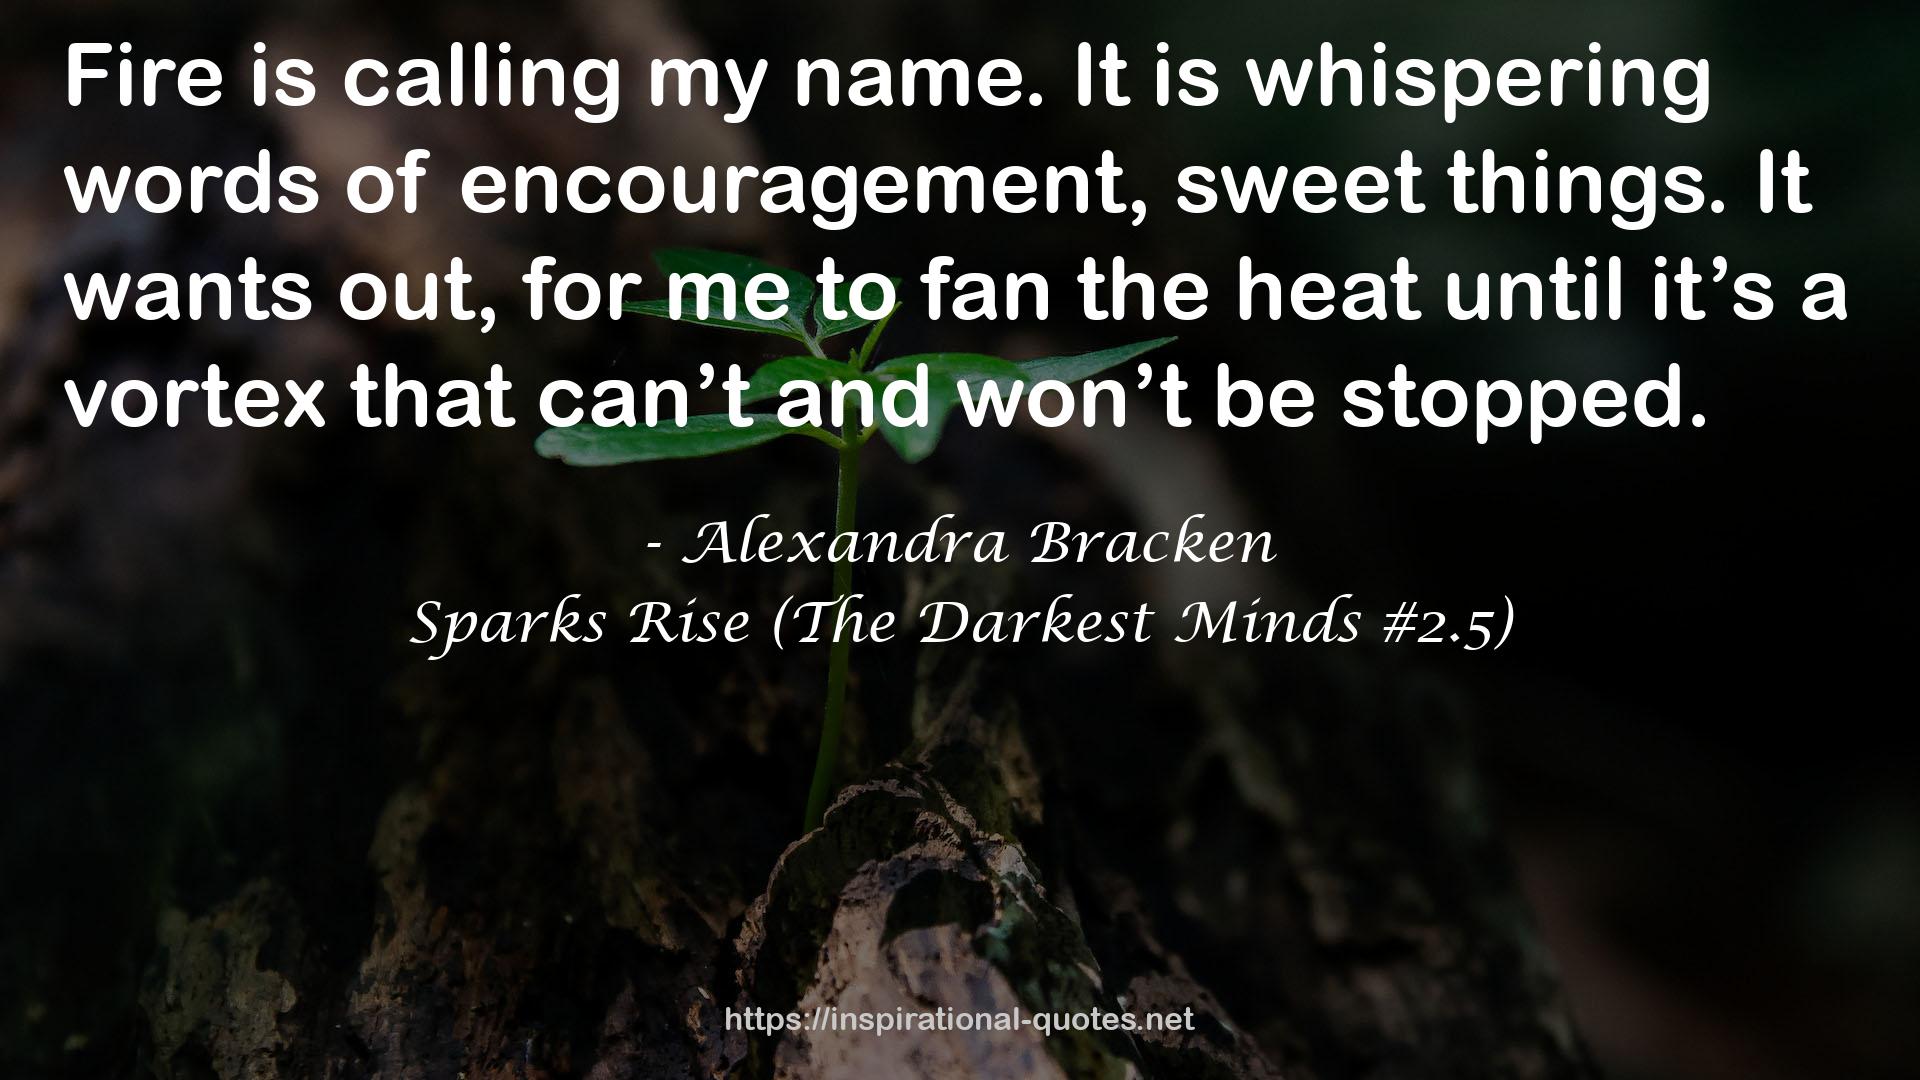 Sparks Rise (The Darkest Minds #2.5) QUOTES